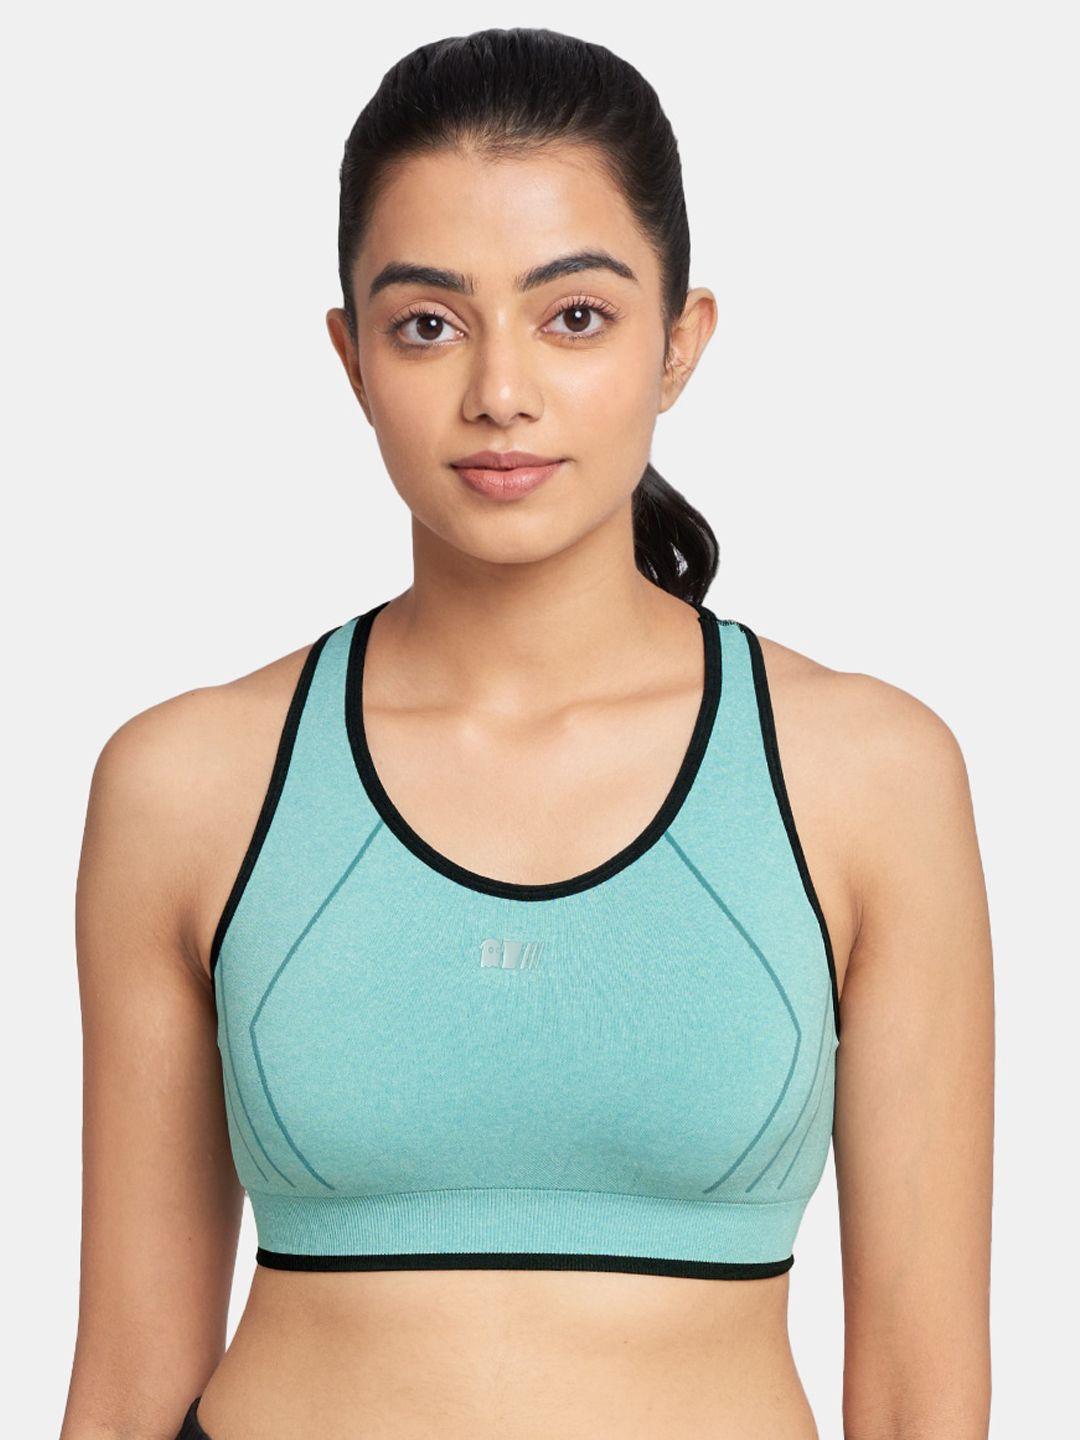 the souled store turquoise blue sports bra